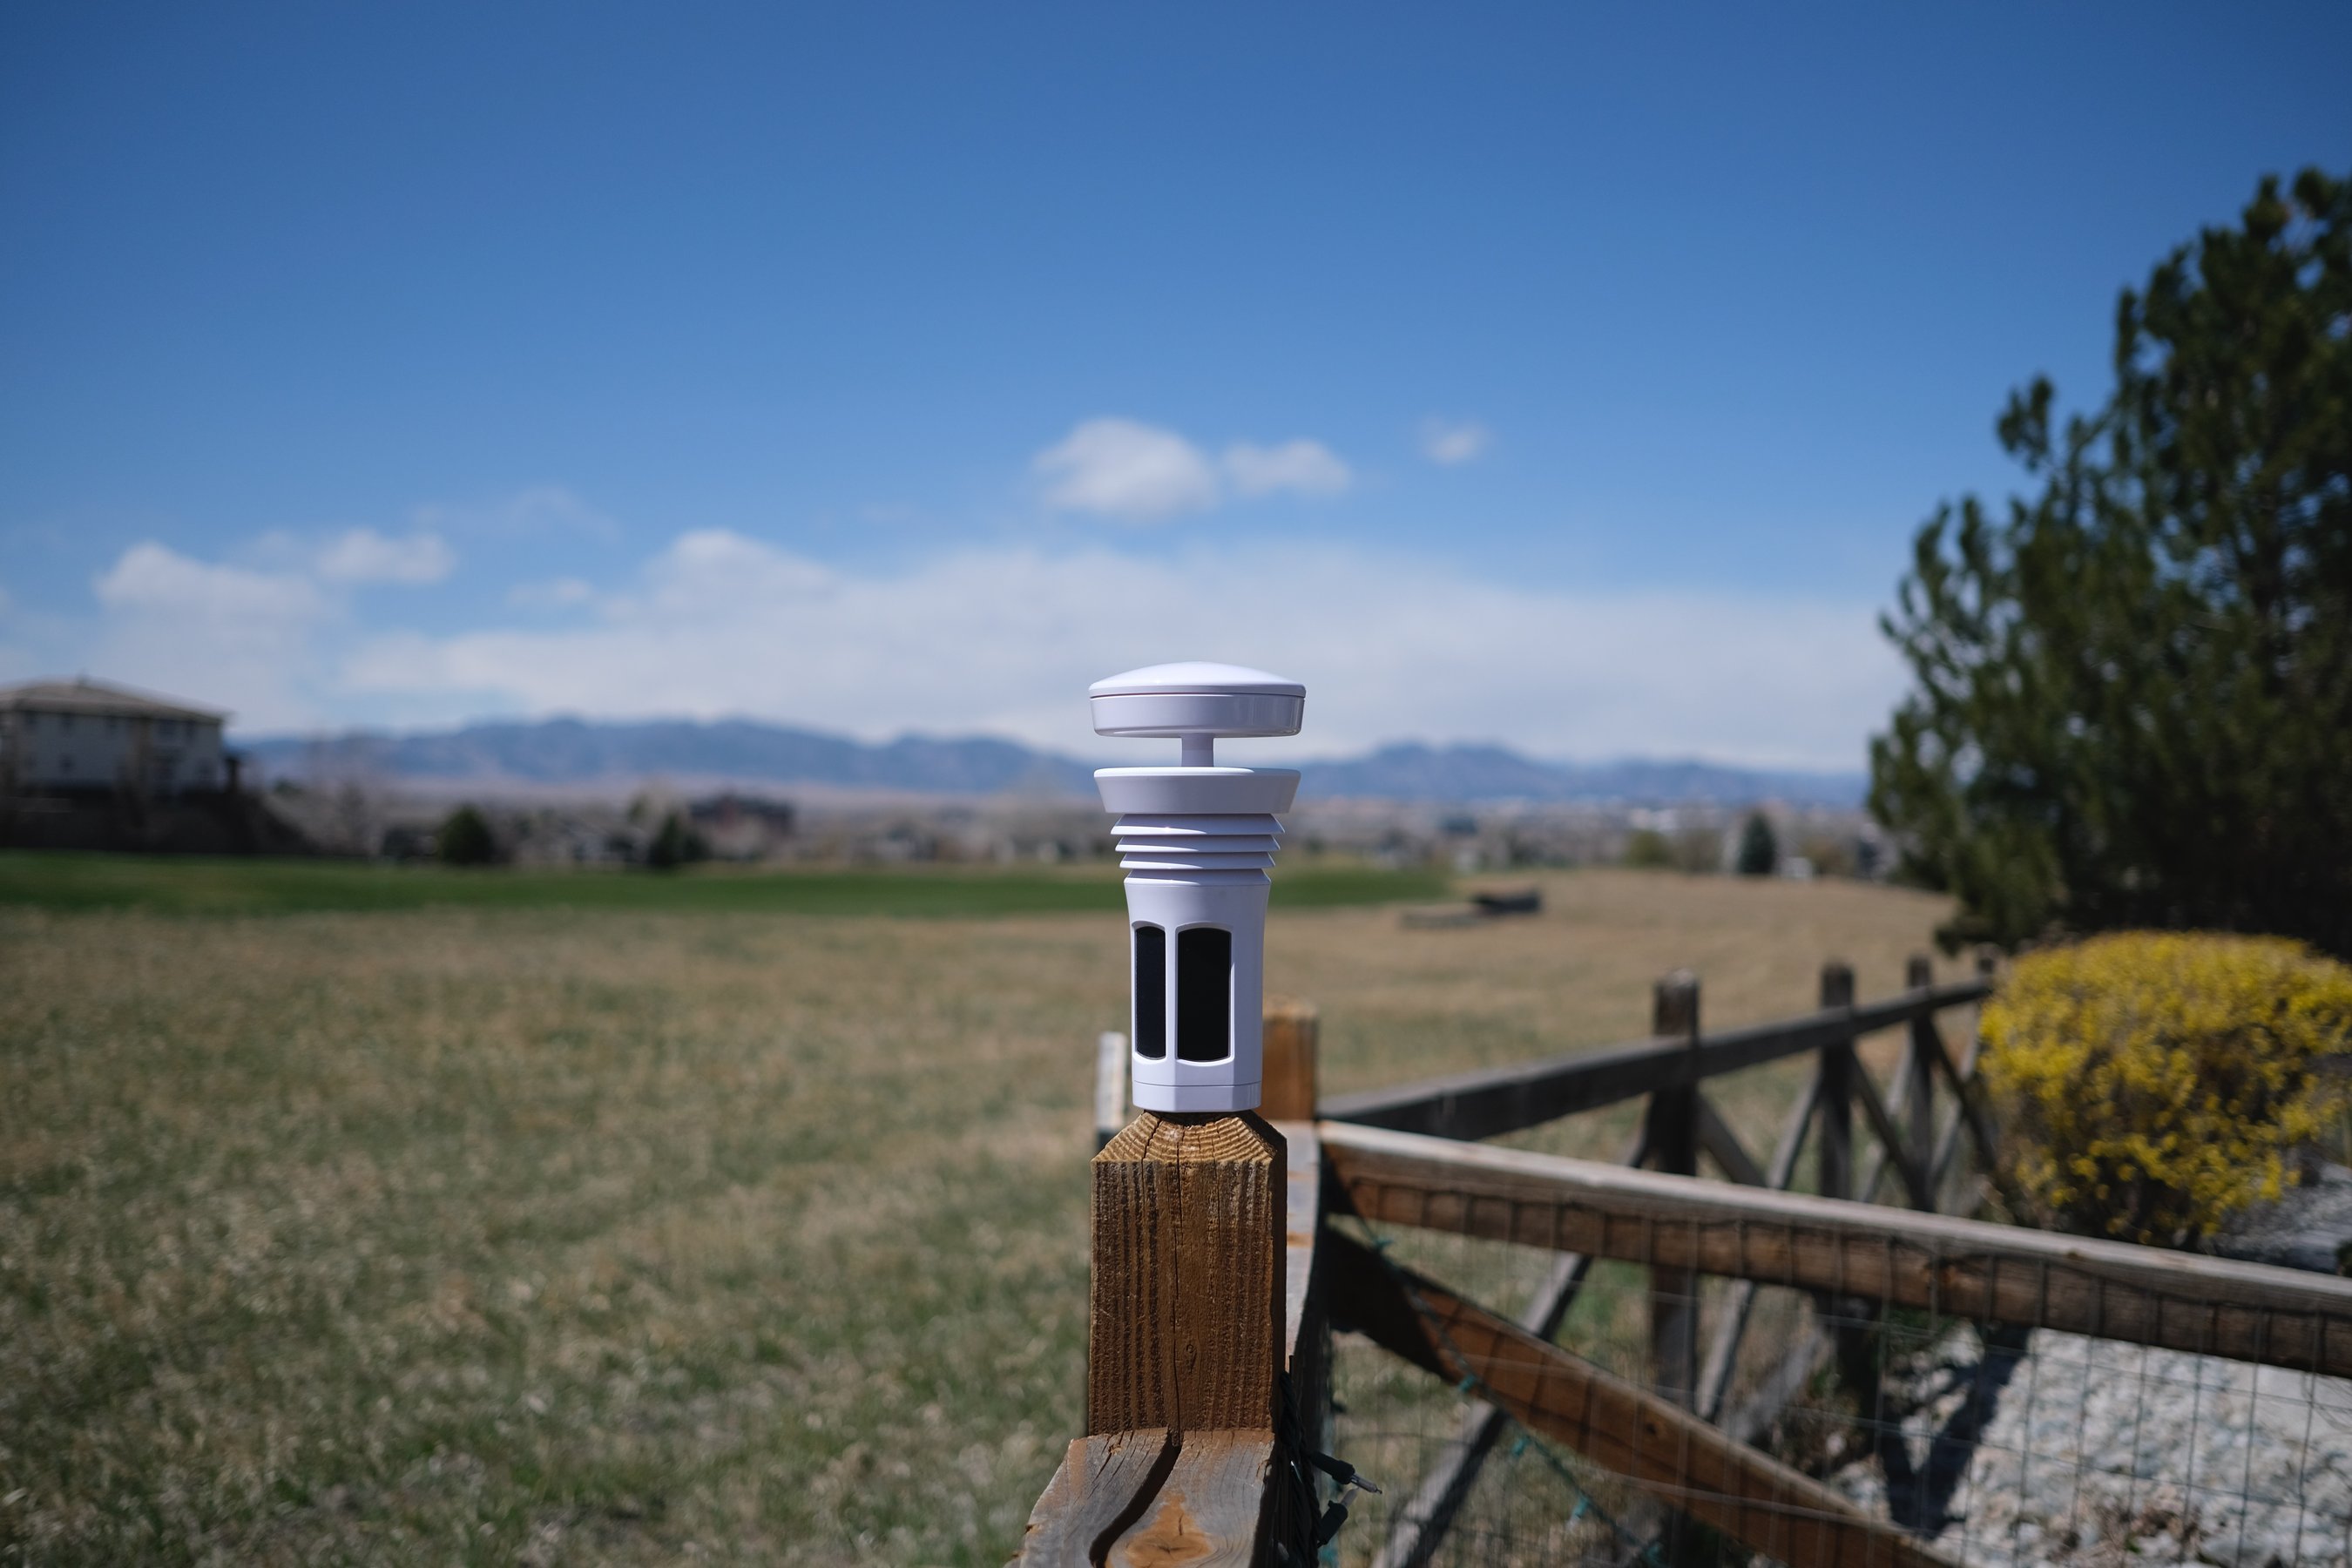 Tempest Weather Station by WeatherFlow on a fencepost